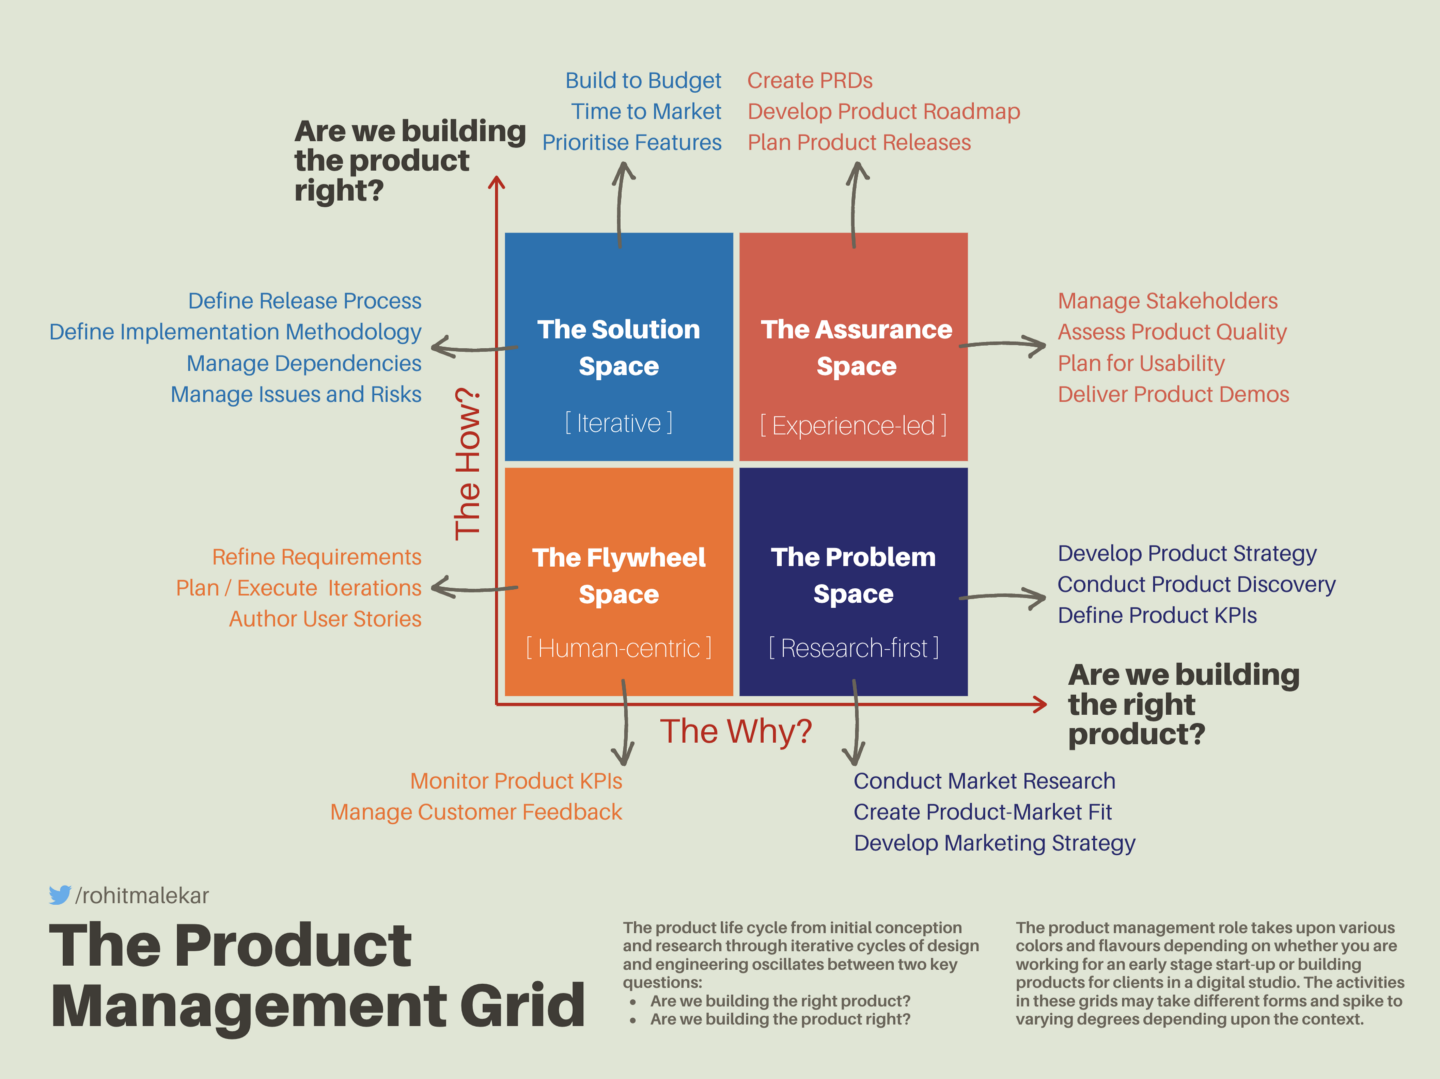 https://rohitmalekar.in/2020/09/30/the-product-management-grid/